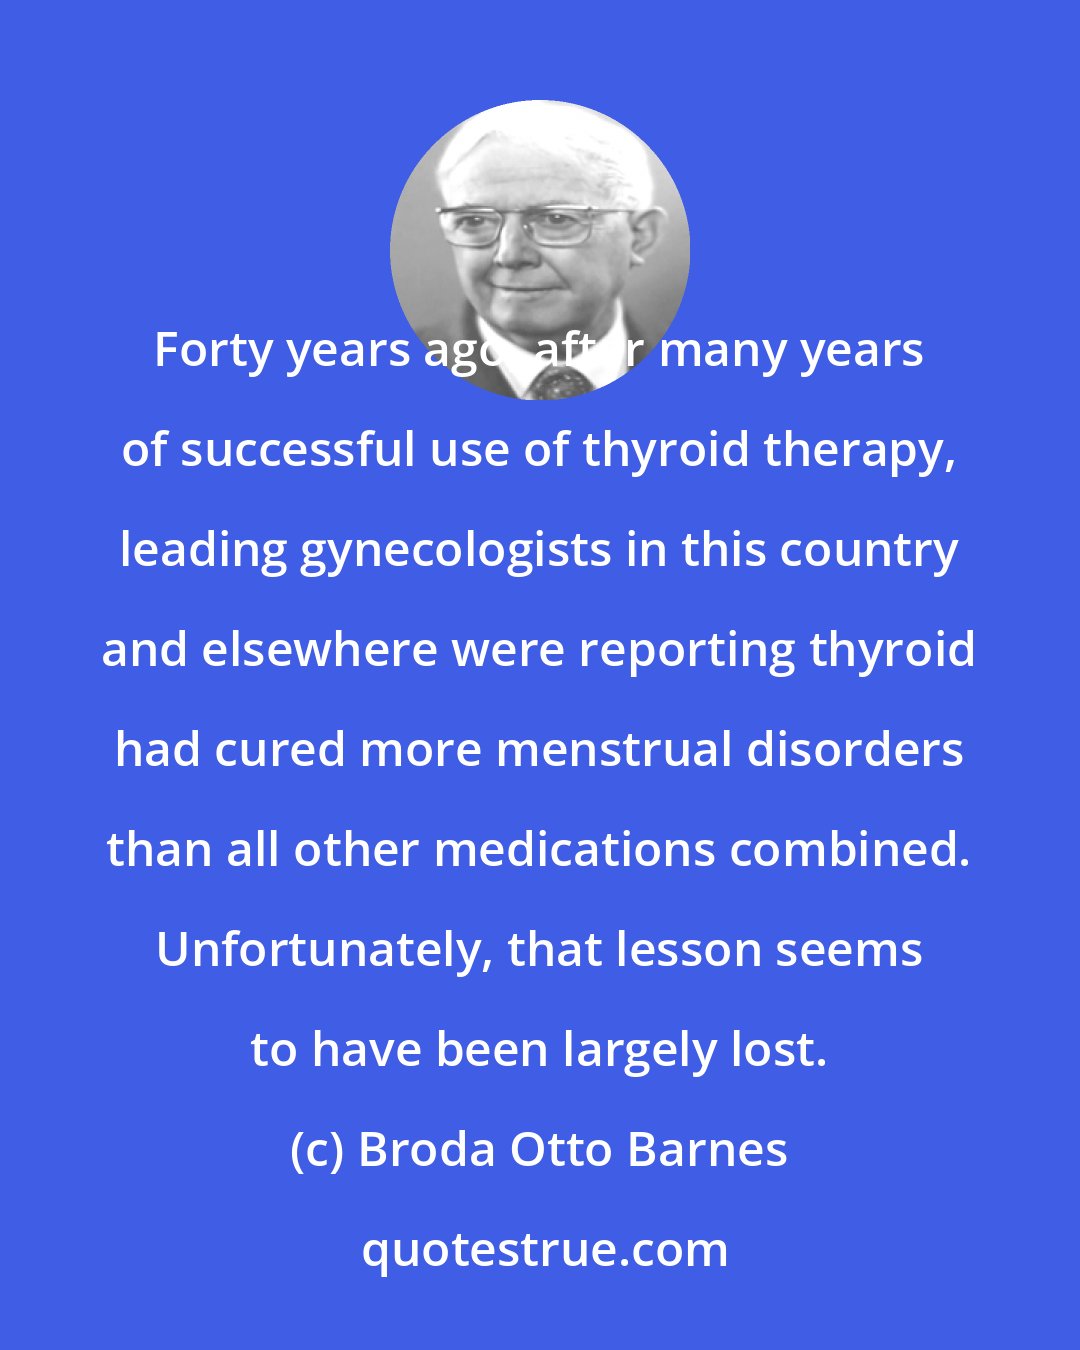 Broda Otto Barnes: Forty years ago, after many years of successful use of thyroid therapy, leading gynecologists in this country and elsewhere were reporting thyroid had cured more menstrual disorders than all other medications combined. Unfortunately, that lesson seems to have been largely lost.